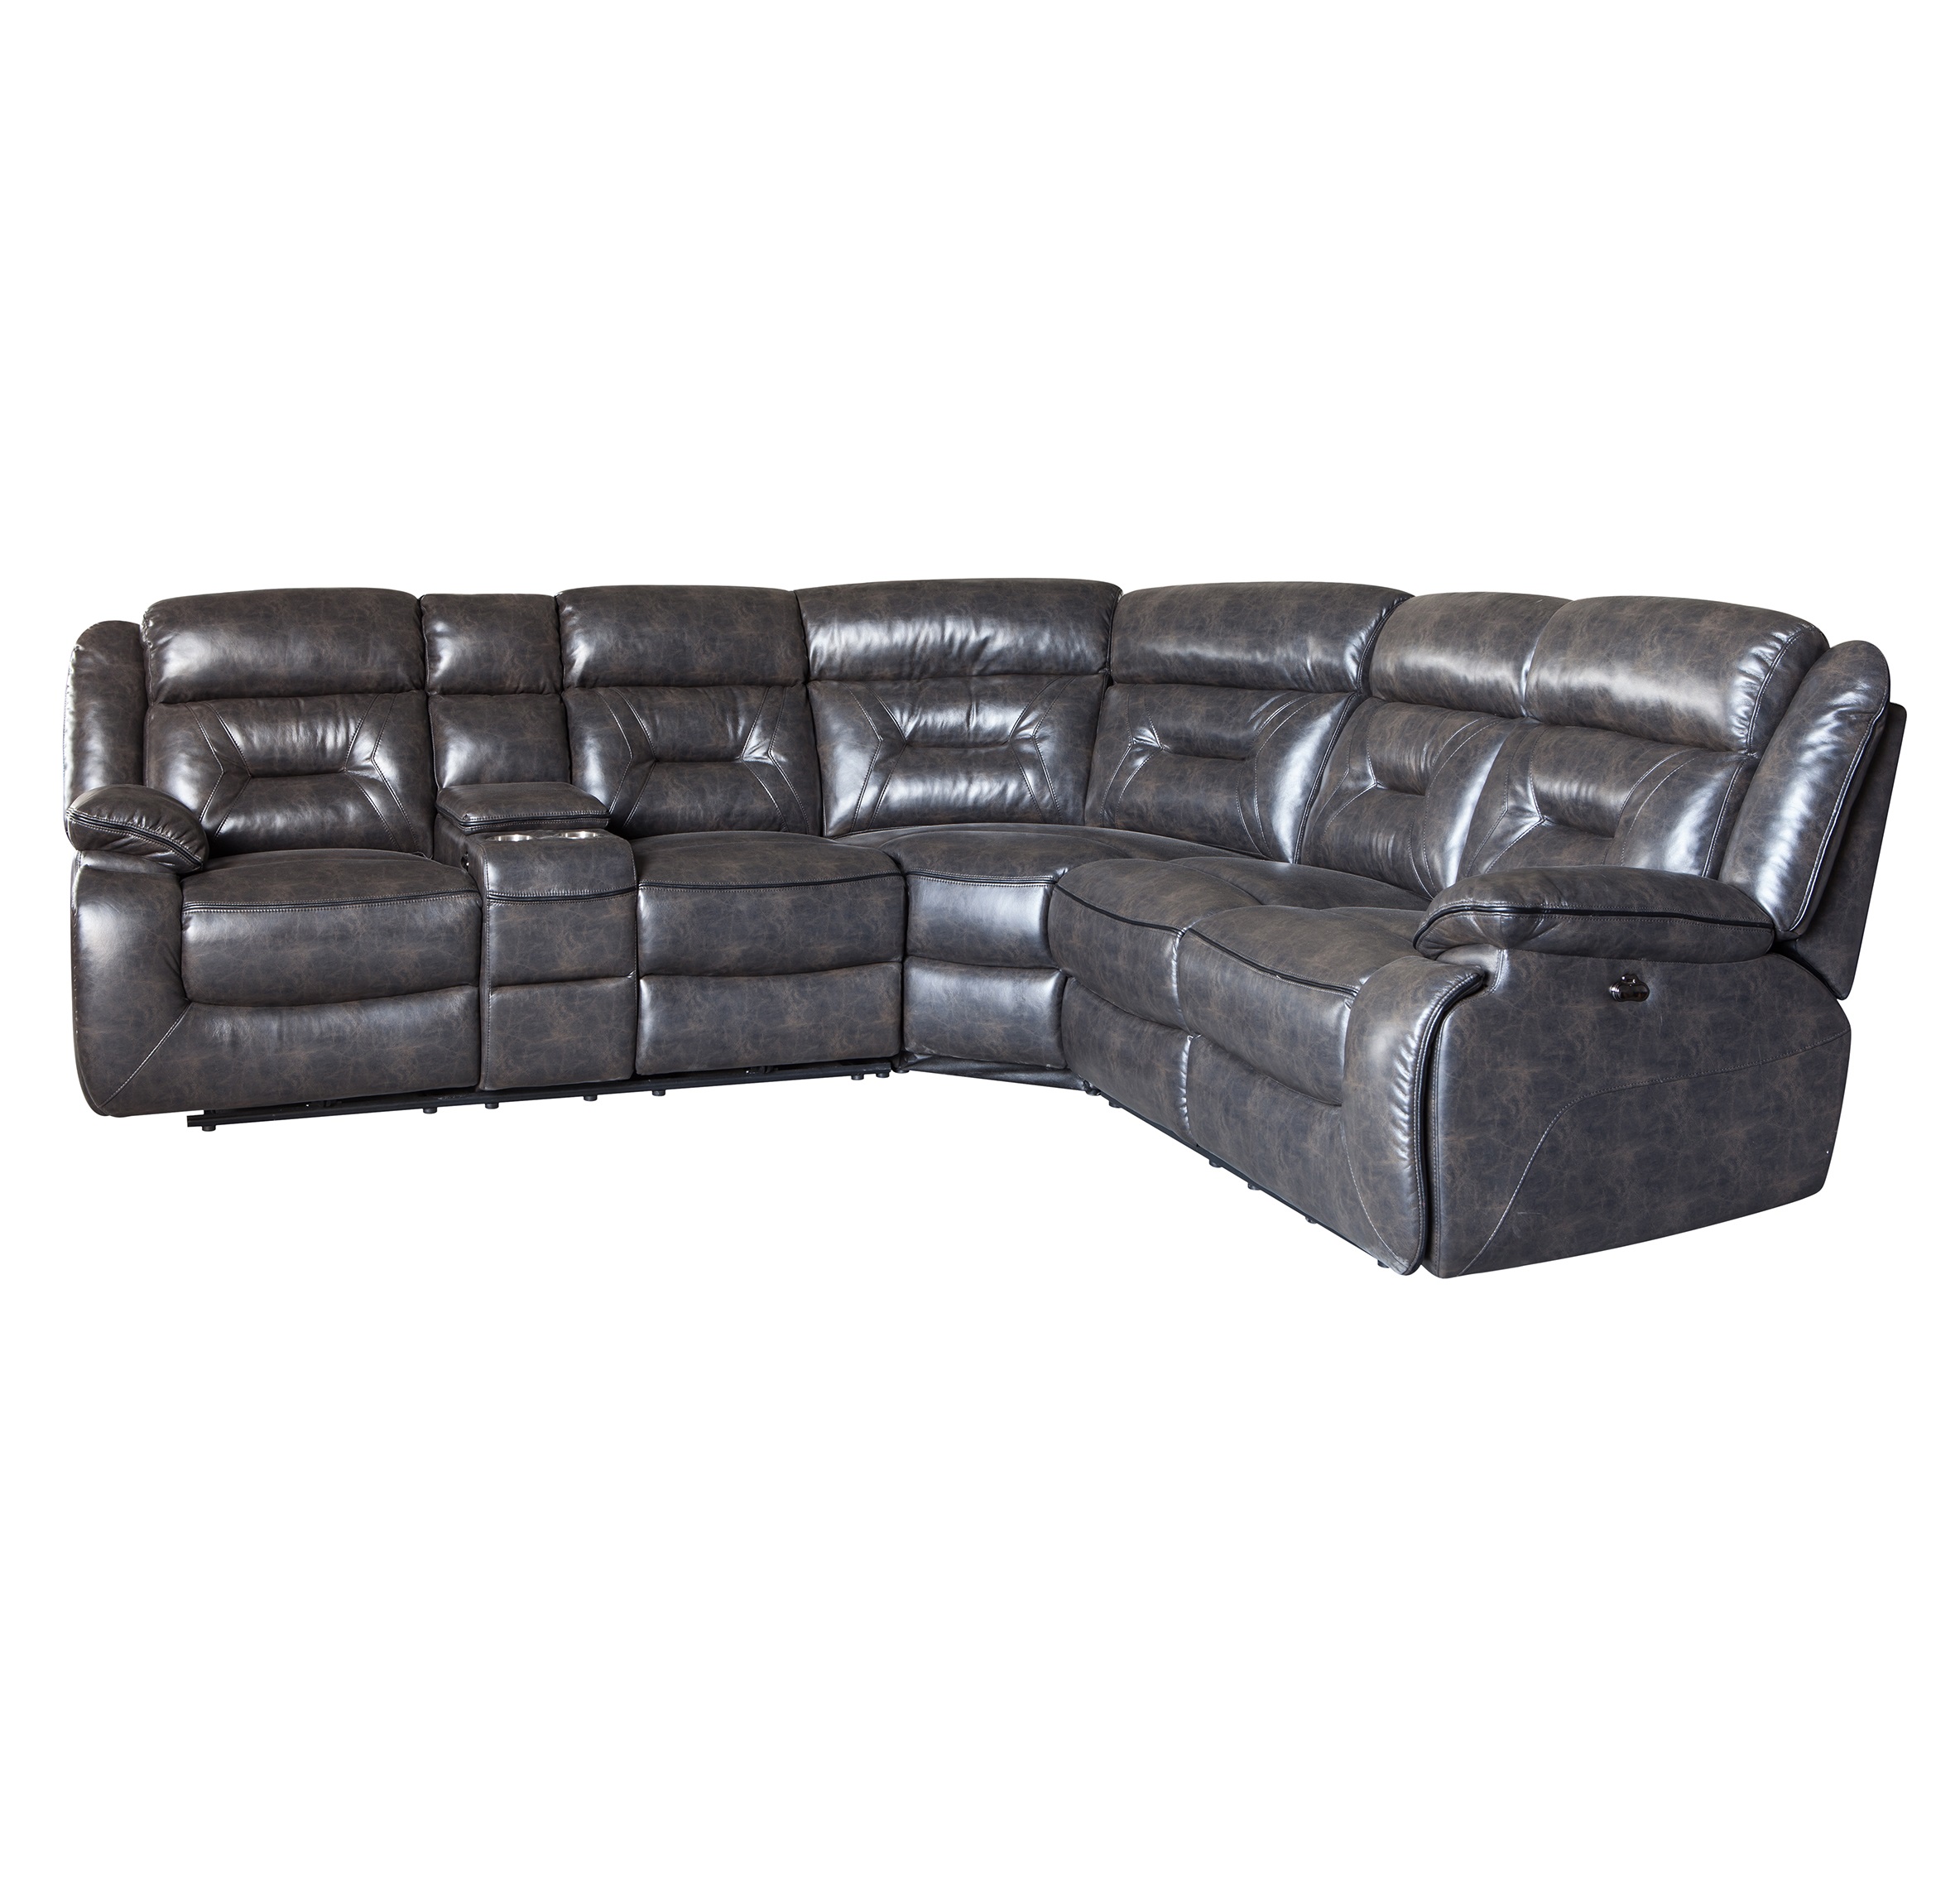 Functional cinema recliner leather sectional sofa with cup holder